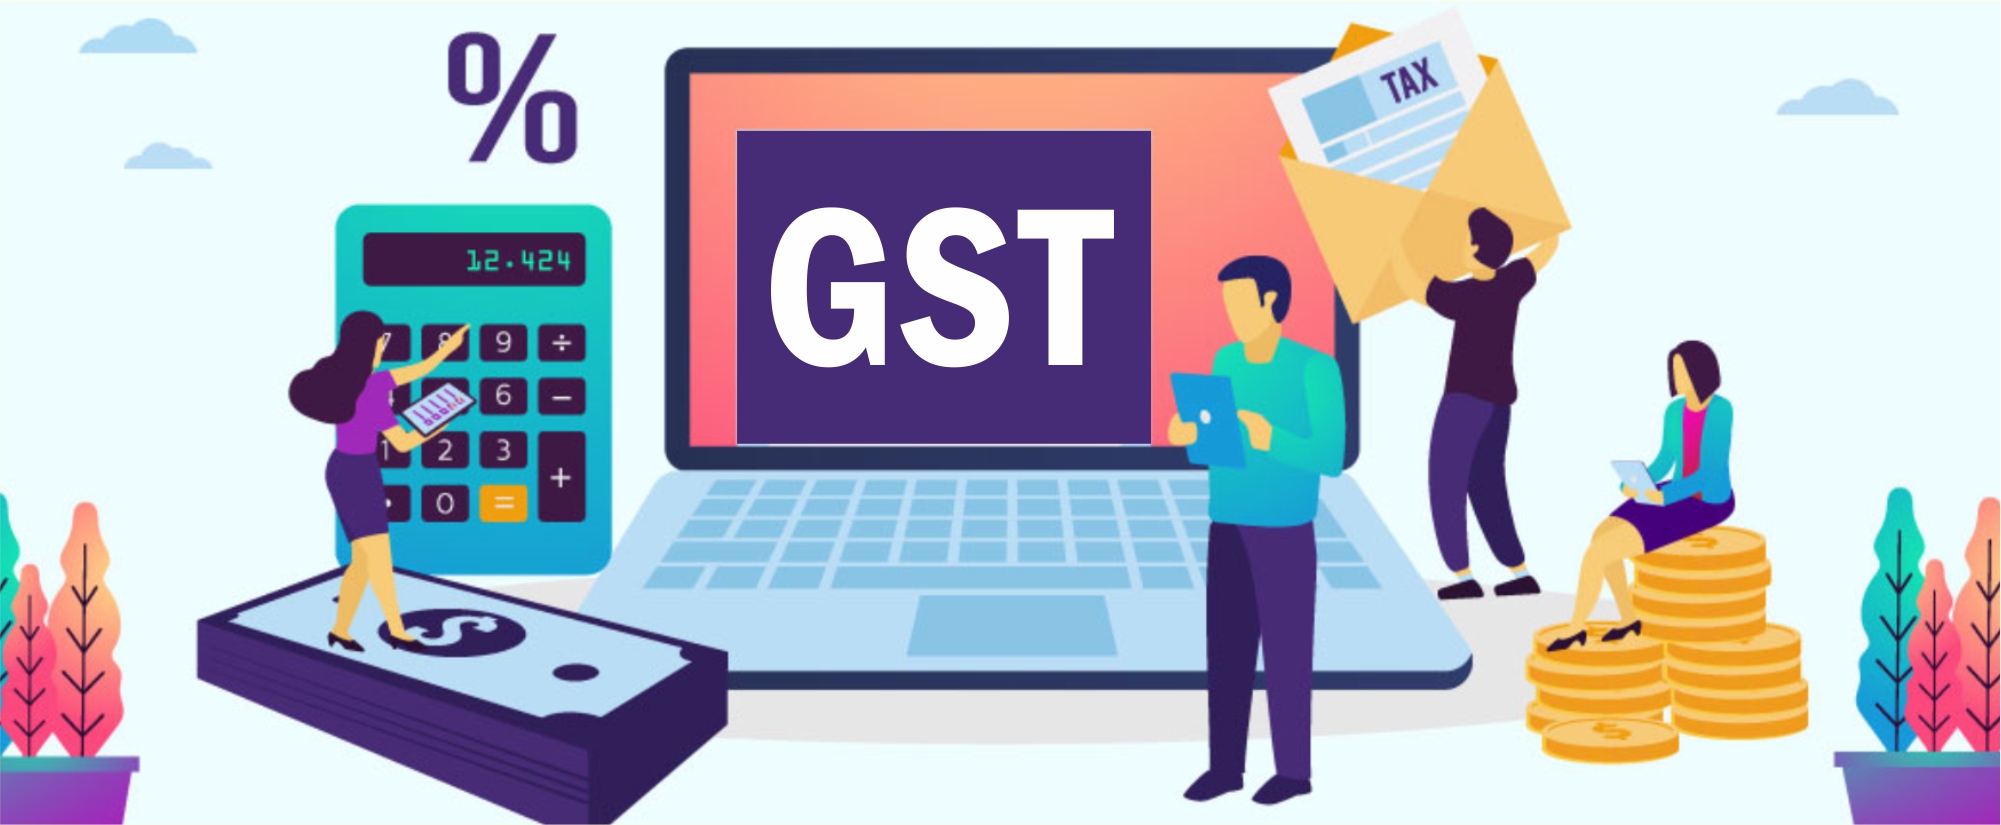 GST Tax Imposed